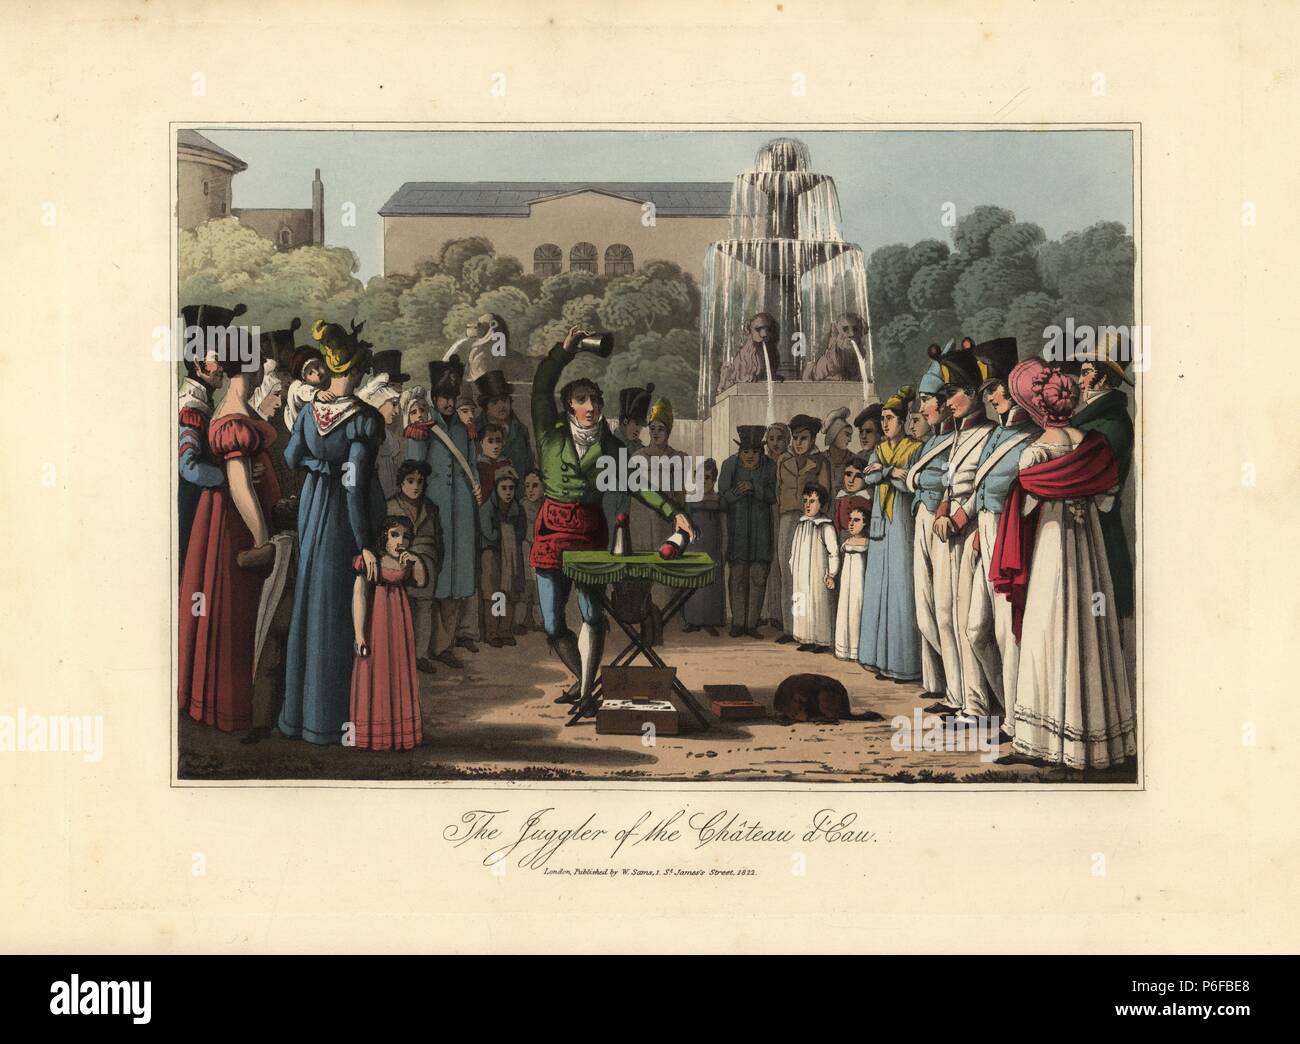 The juggler at the Chateau d'Eau, performing sleight of hand in front of an audience of soldiers and nurses. Handcoloured aquatint engraving after an illustration credited to Victor Auver from 'A Tour through Paris,' William Sams, London, 1825. Stock Photo